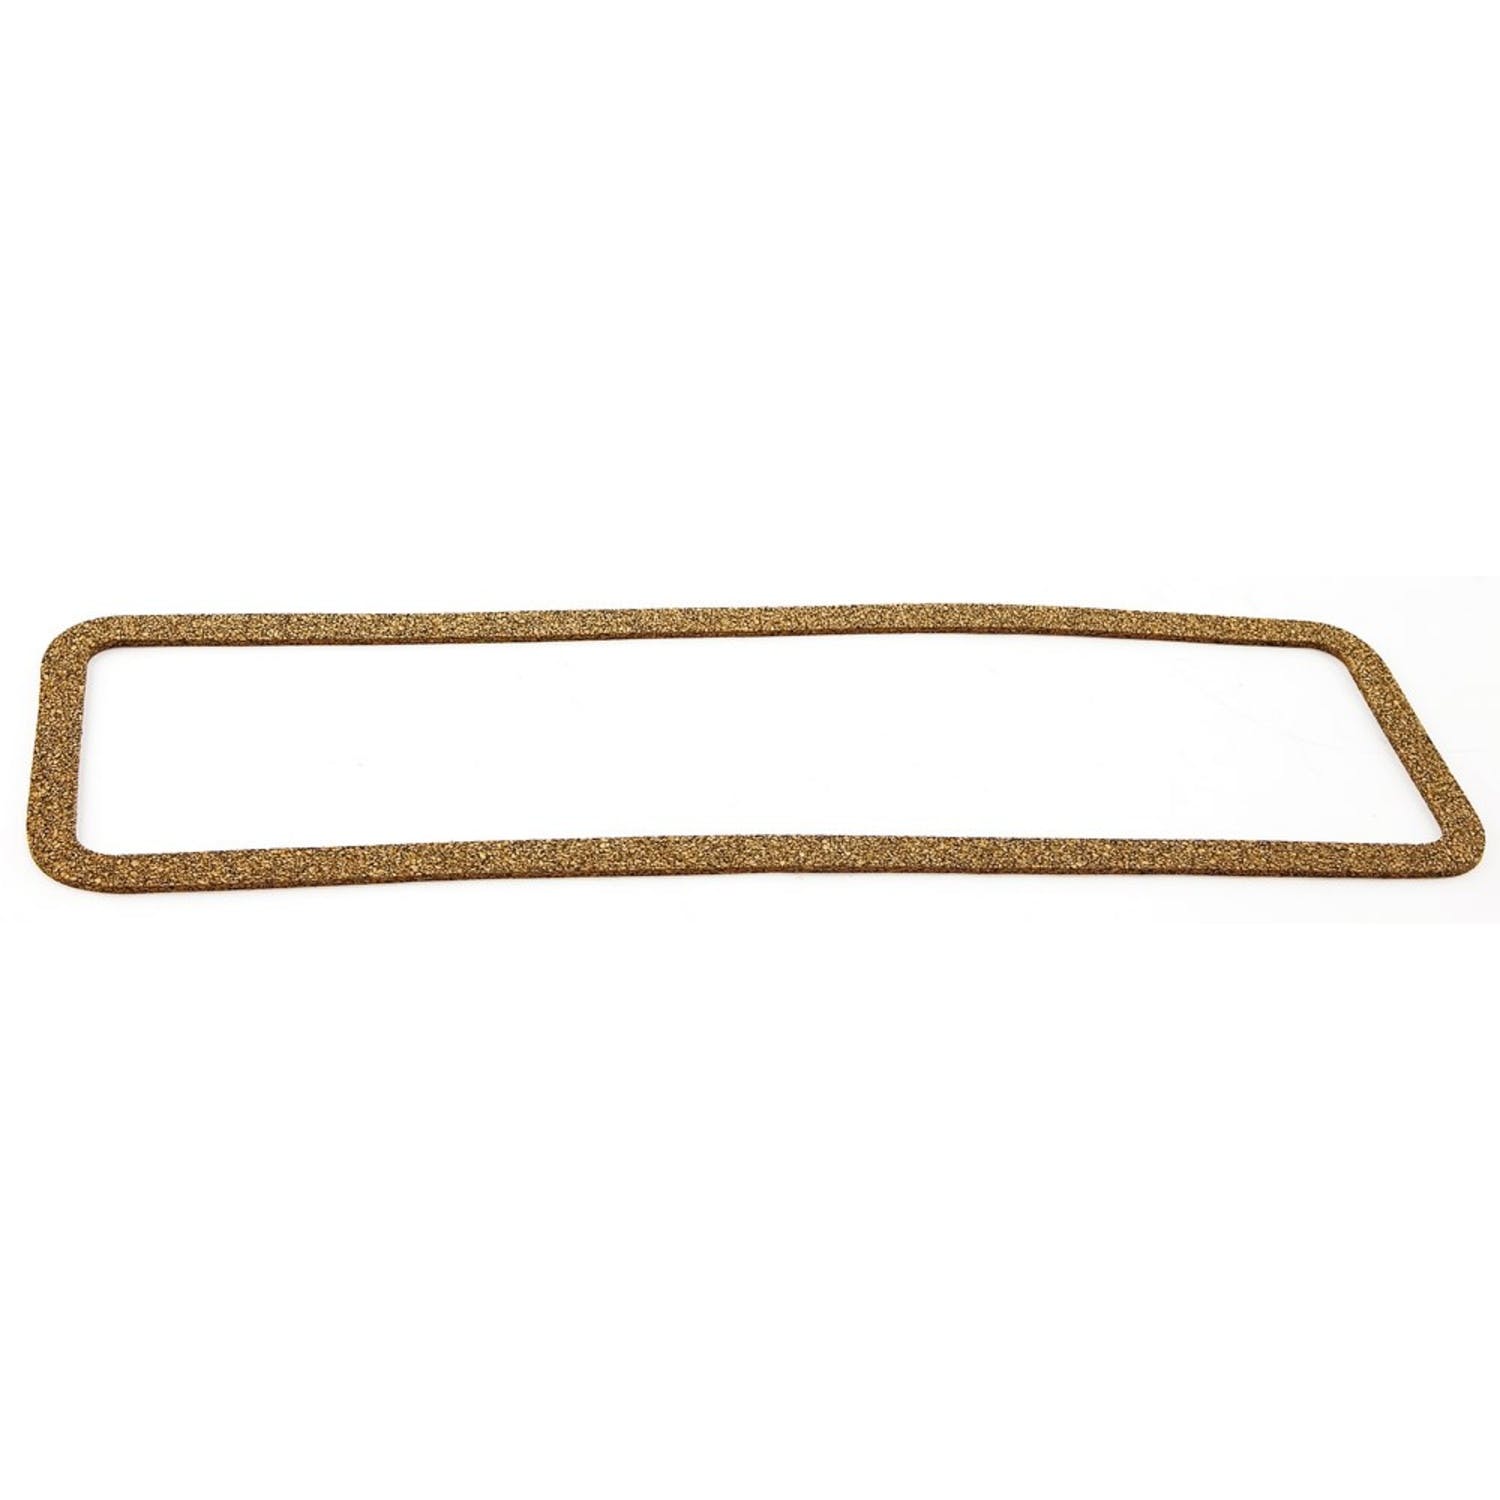 Omix-ADA 17450.07 Engine Tappet Cover Gasket